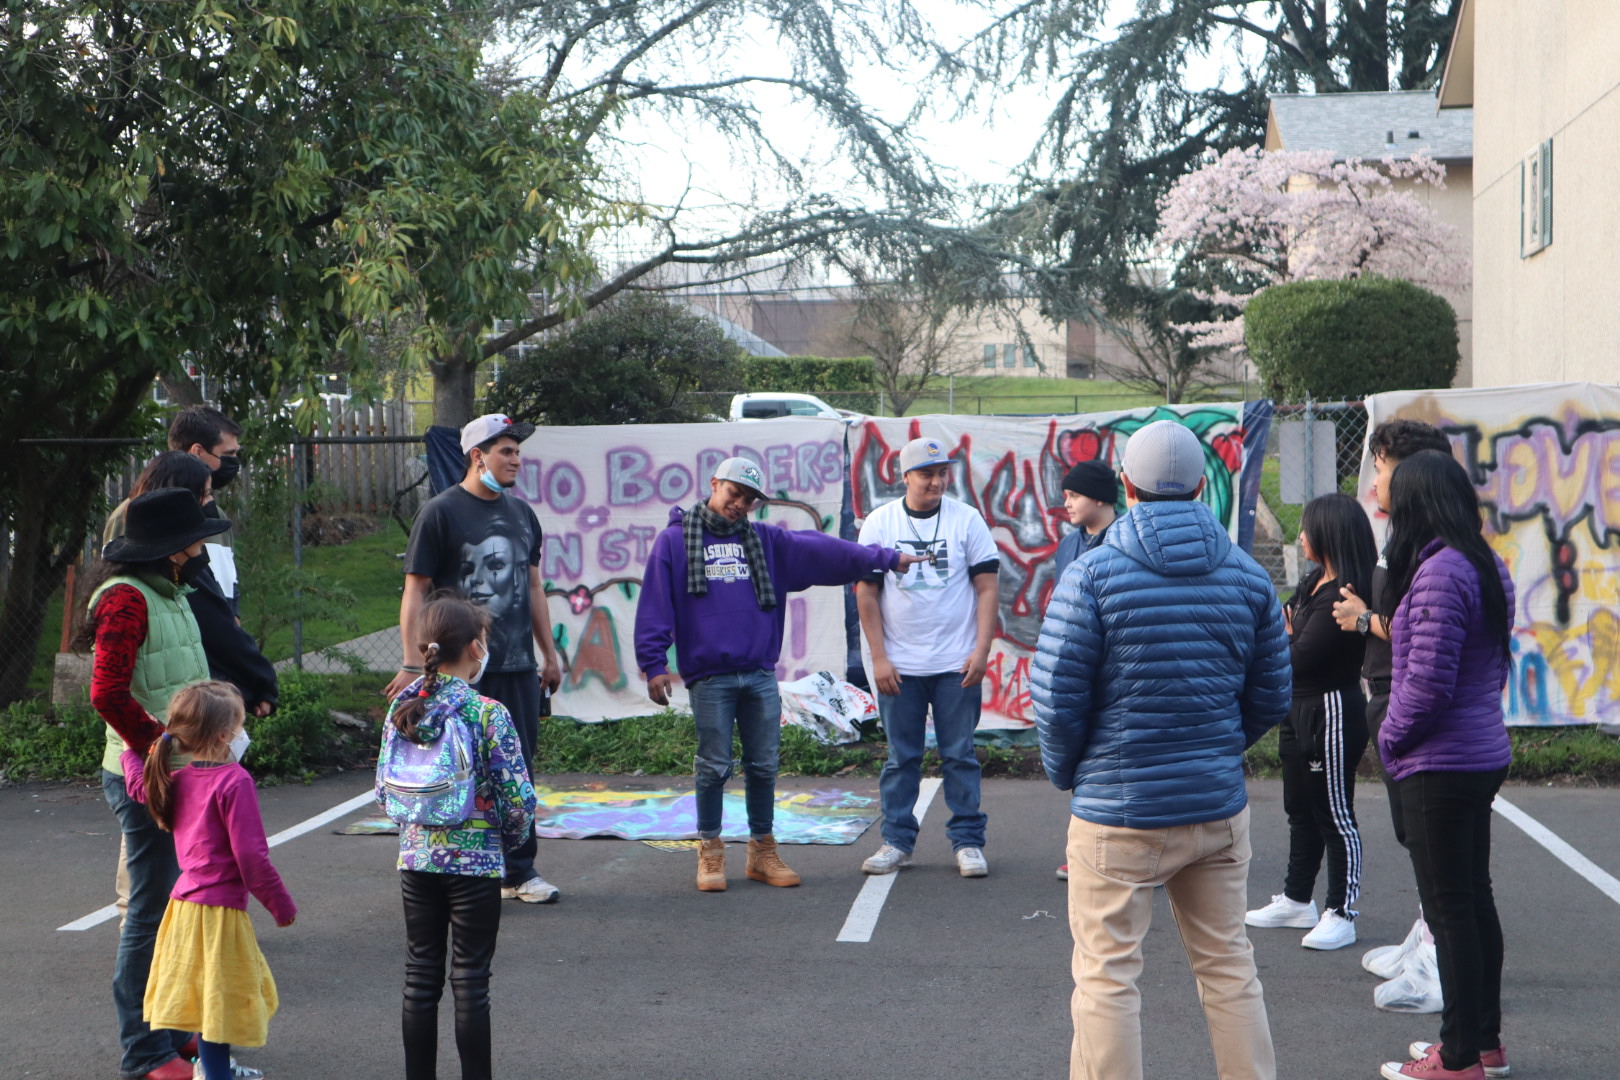 A group of community members, both children and adults, standing in the circle in a parking lot with hand-painted signs in the background.